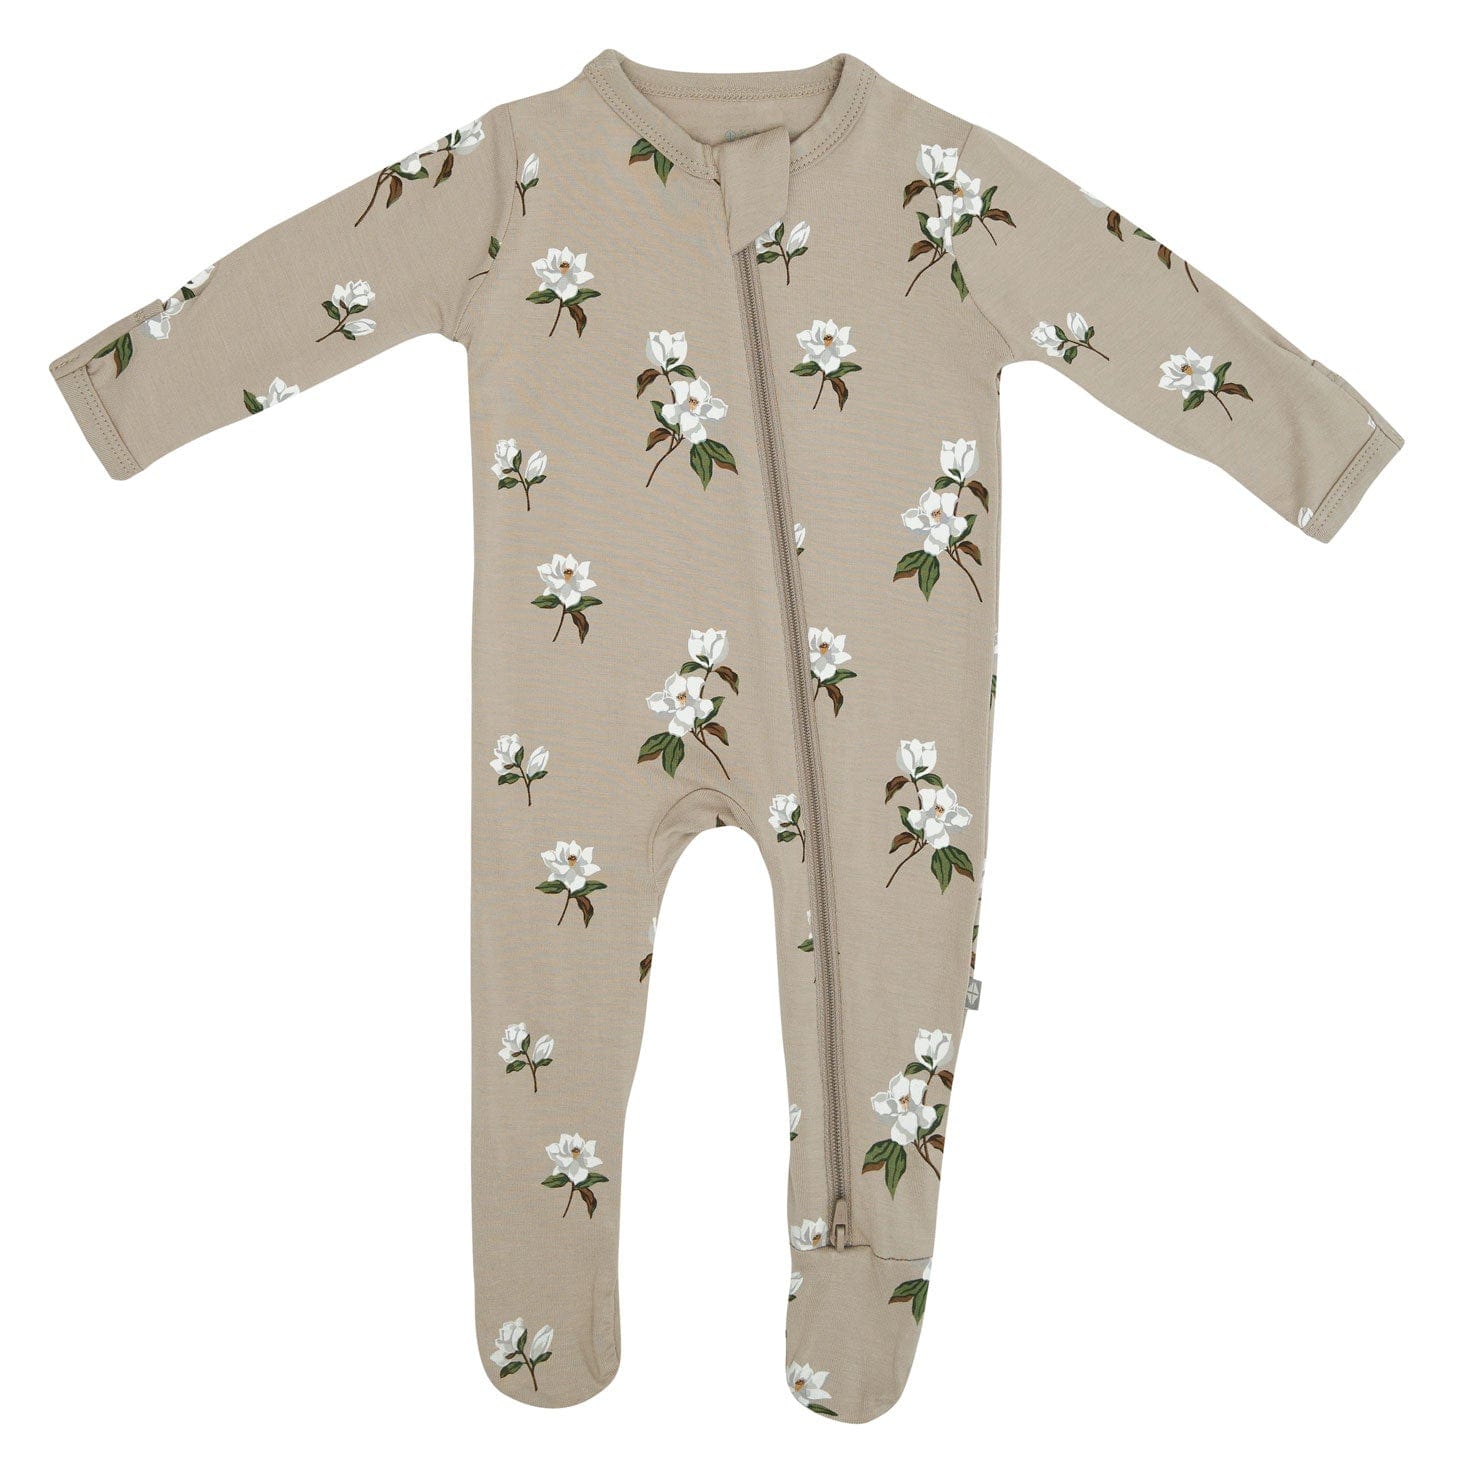 Kyte BABY Zippered Footies Zippered Footie in Small Magnolia on Khaki